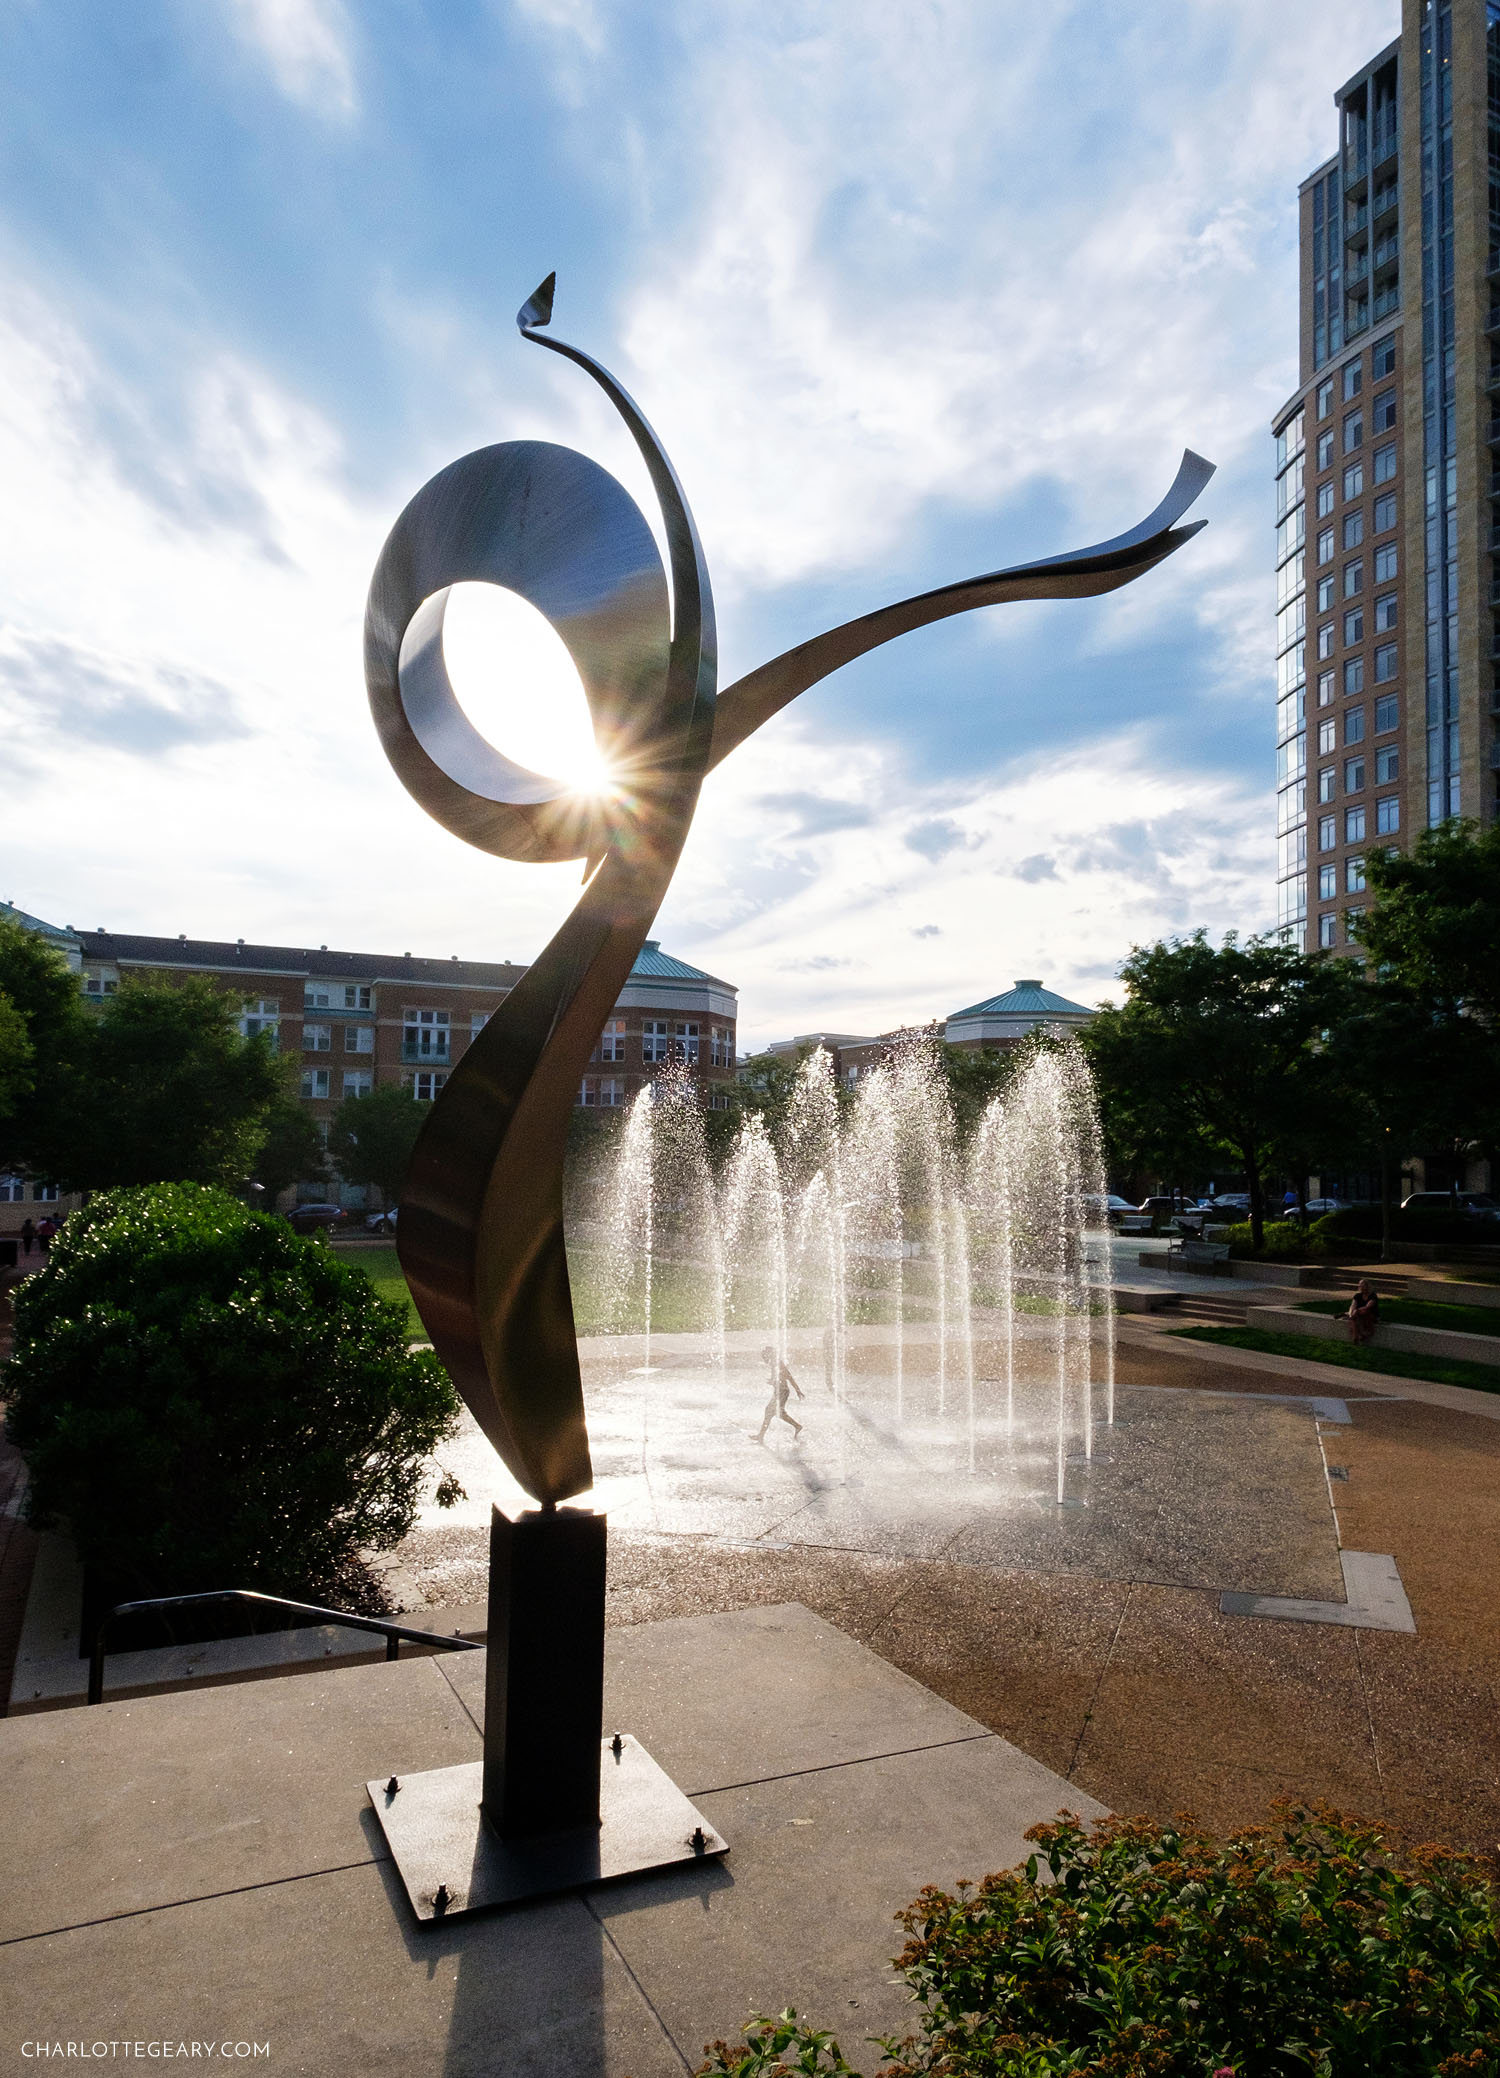 Fidelity of Form at Reston Town Center